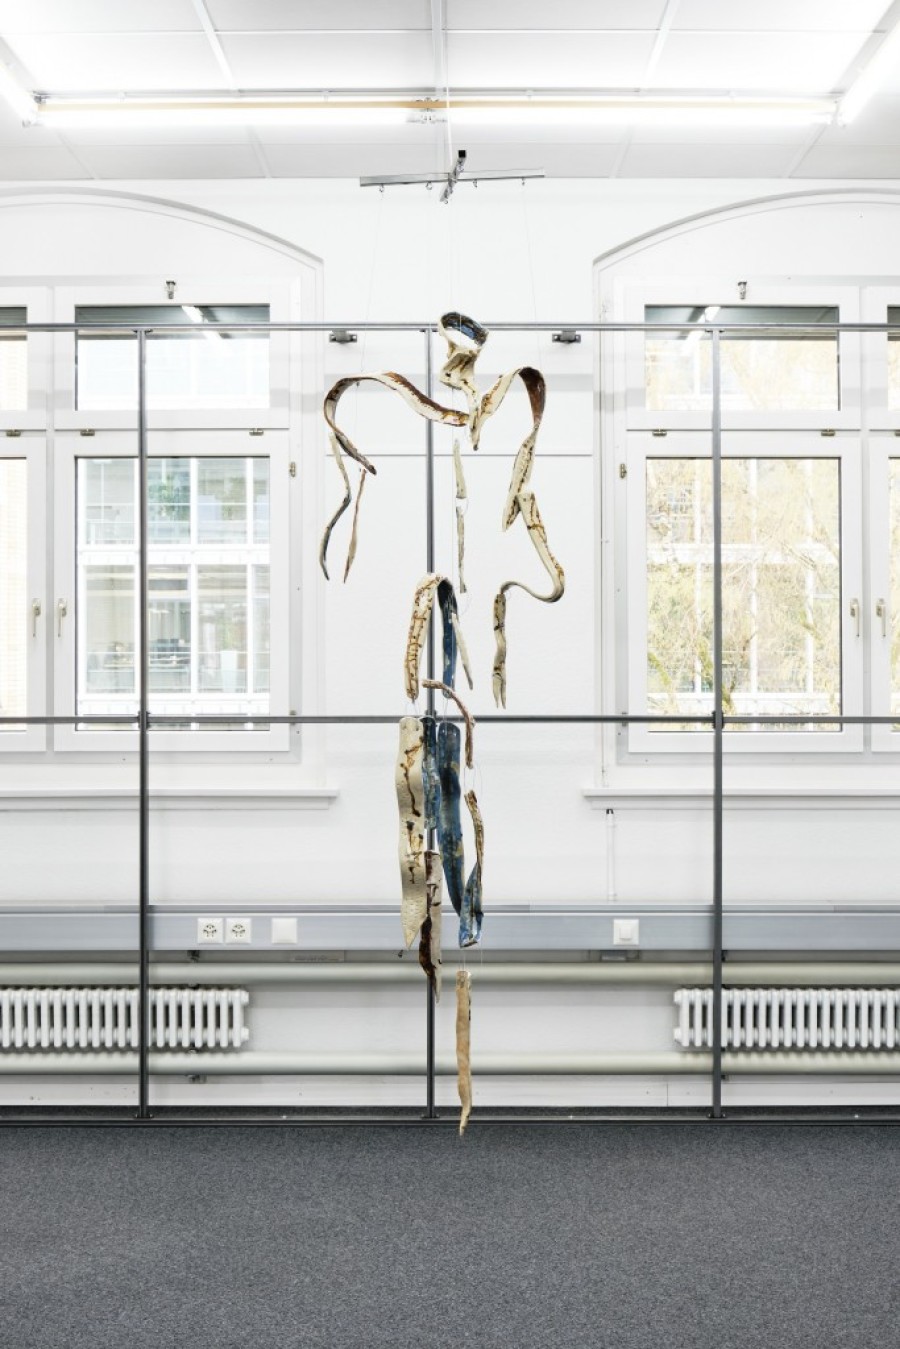 Camille Dumond, BGY 4, glazed stoneware suspension with willow and cedar ashes, steel, ca. 180 x 60 x 60 cm, 2021. Photo by Philip Ullrich. Courtesy of unanimous consent and the artist